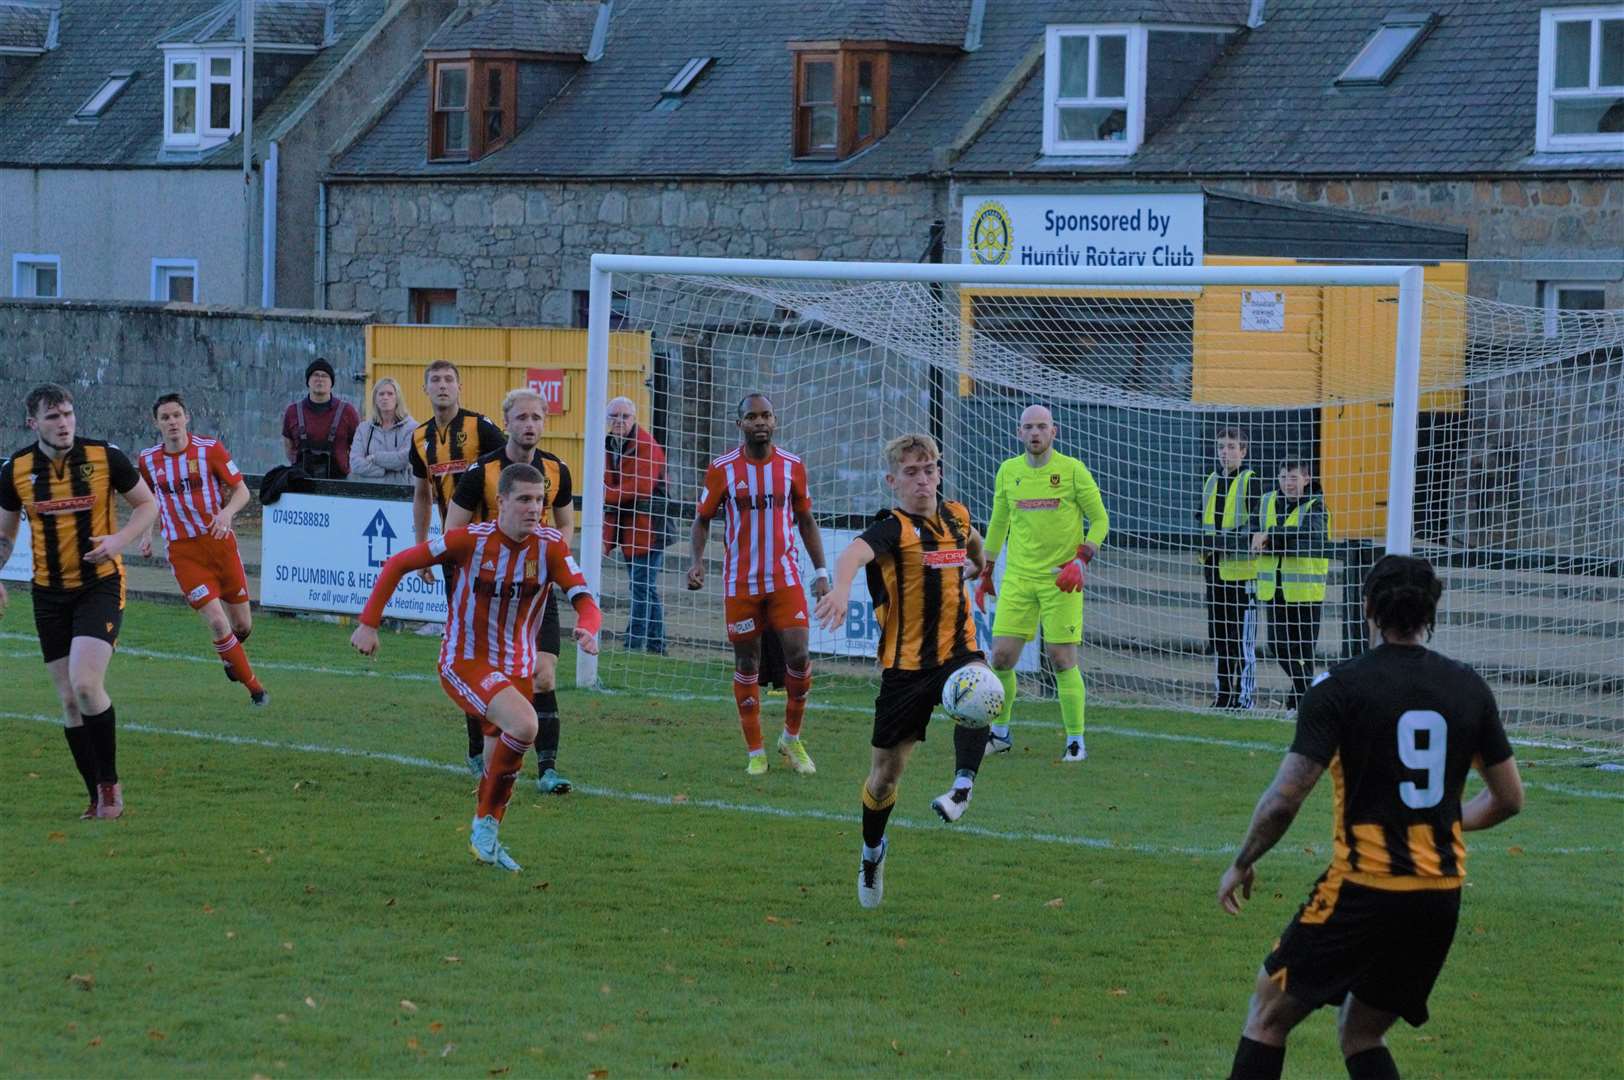 Formartine's Johnny Crawford scored twice in the cup game against Huntly. Picture: Derek Lowe